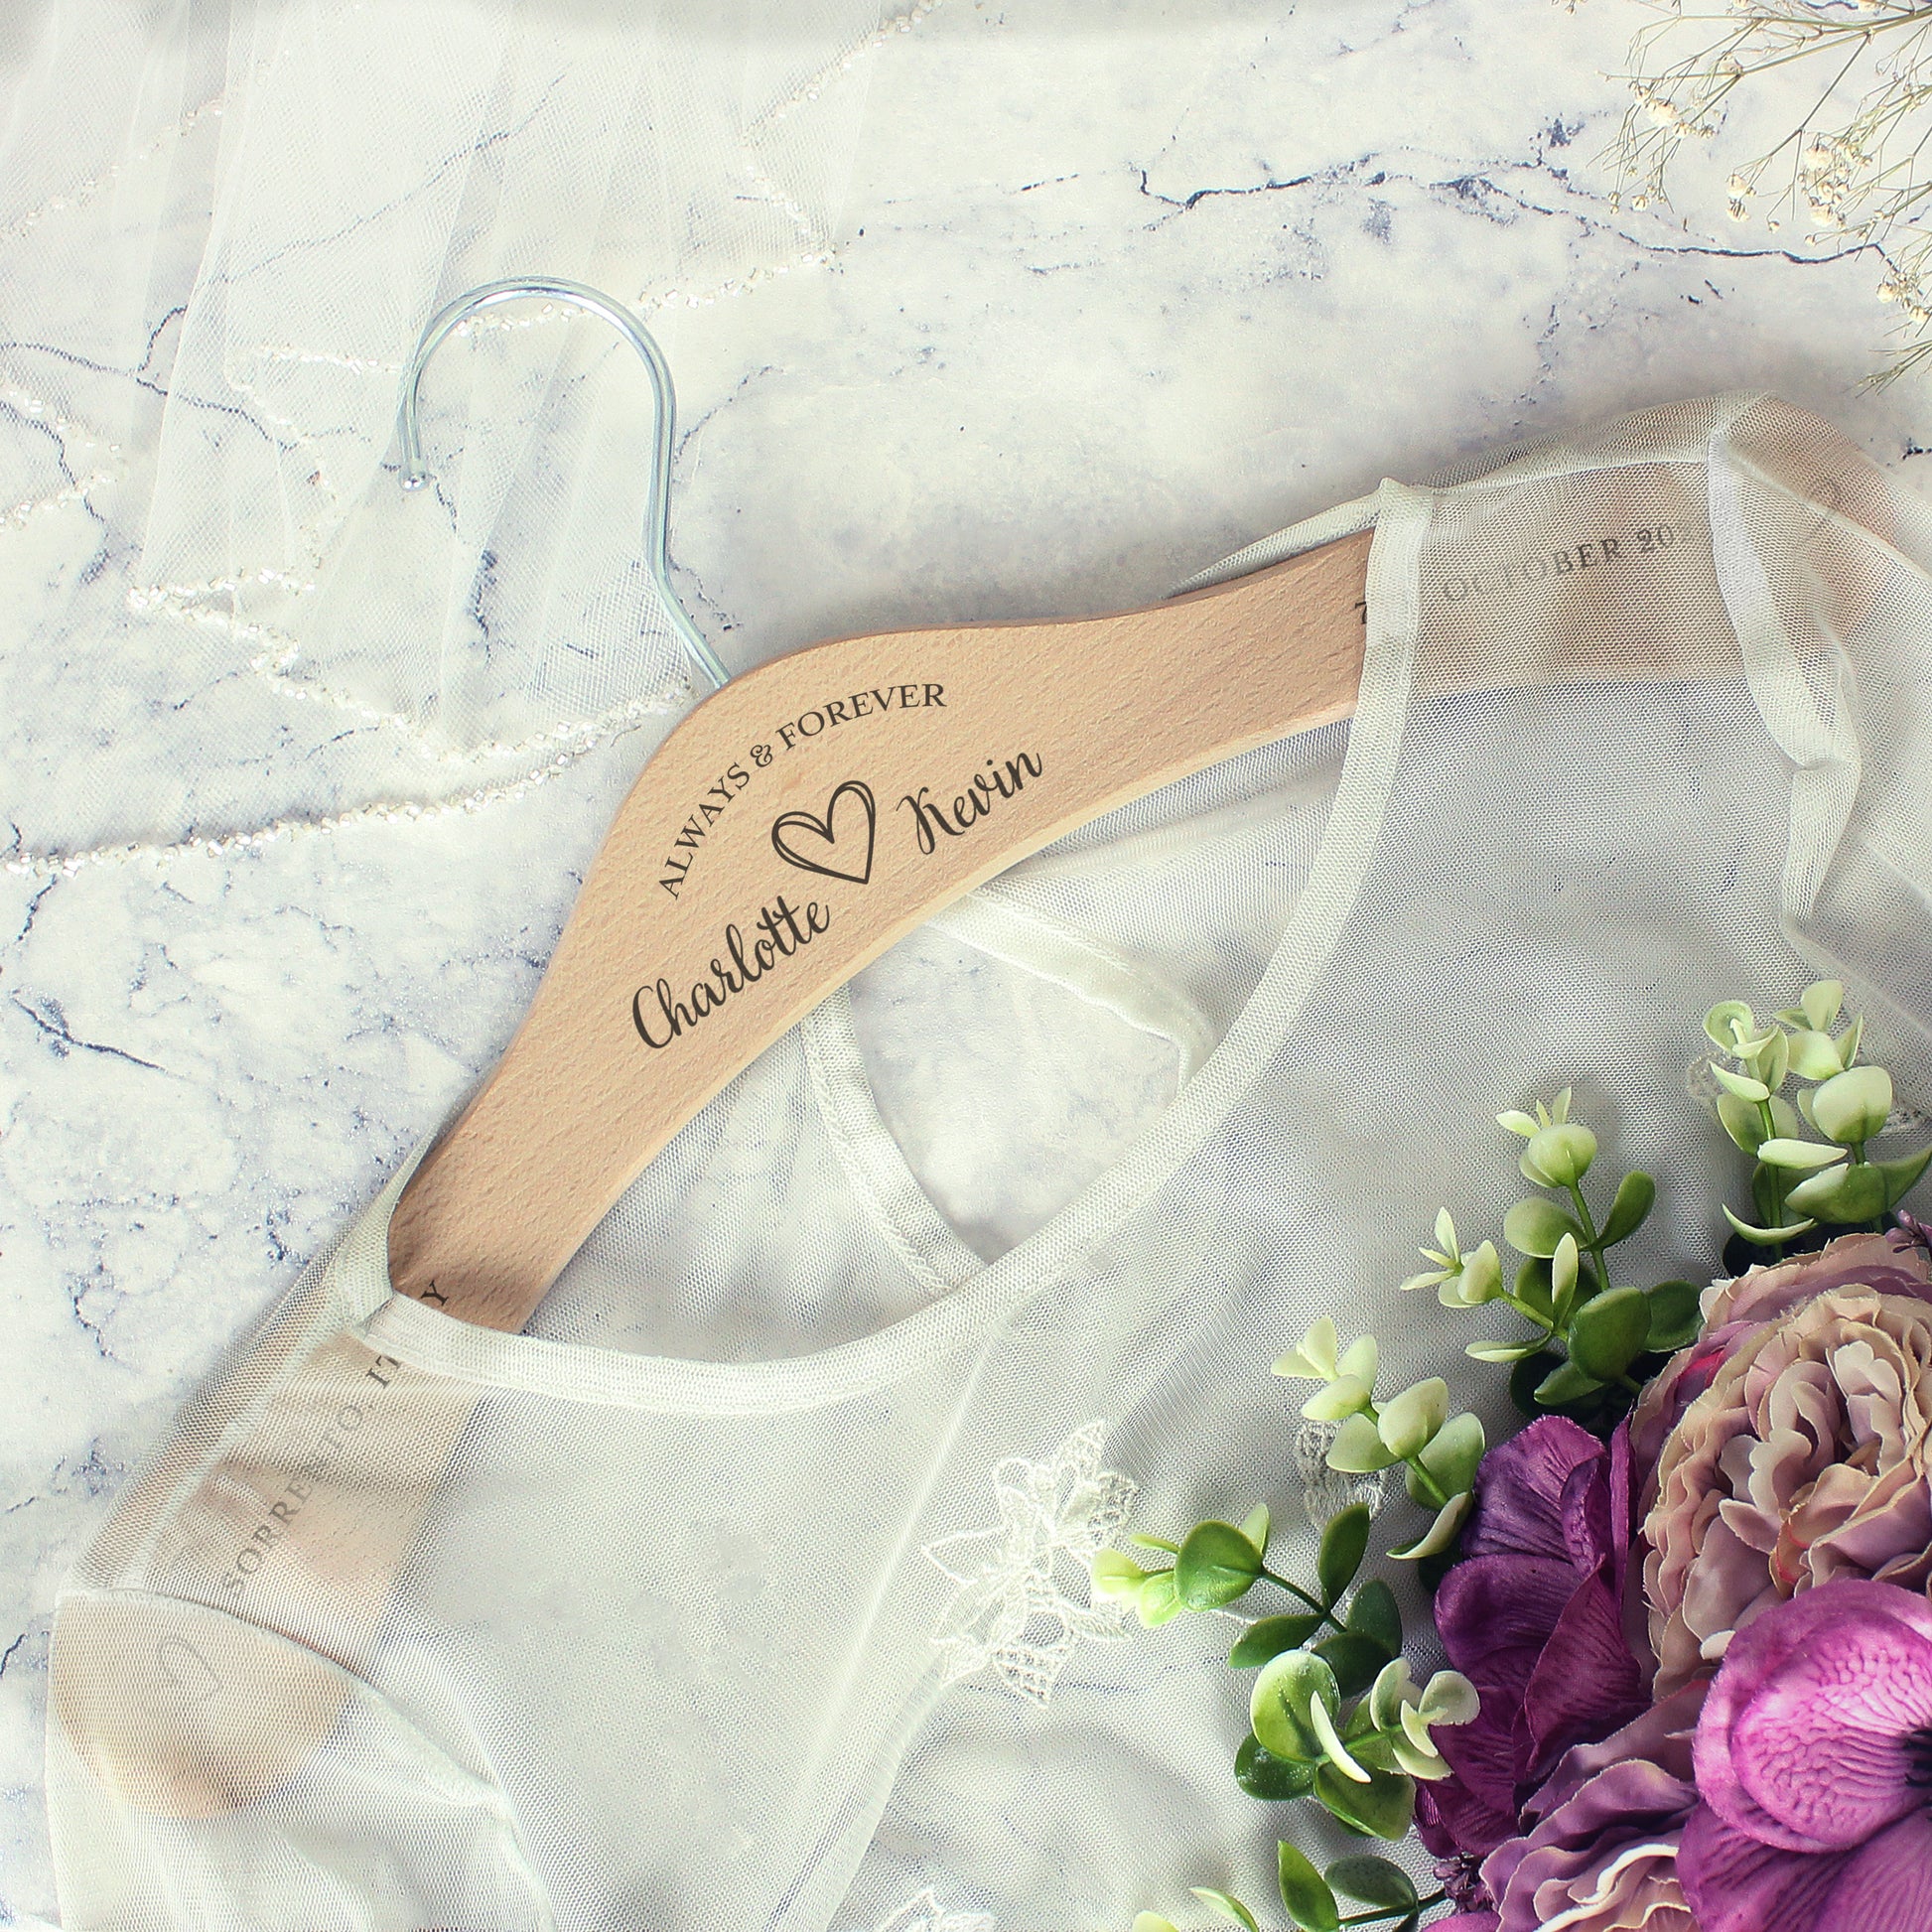 personalised wooden wedding hanger with Bride & Groom's names under the words "Always and Forever" and with a pretty sketched heart between the names. Room for further personalisation on each arm of the hanger.